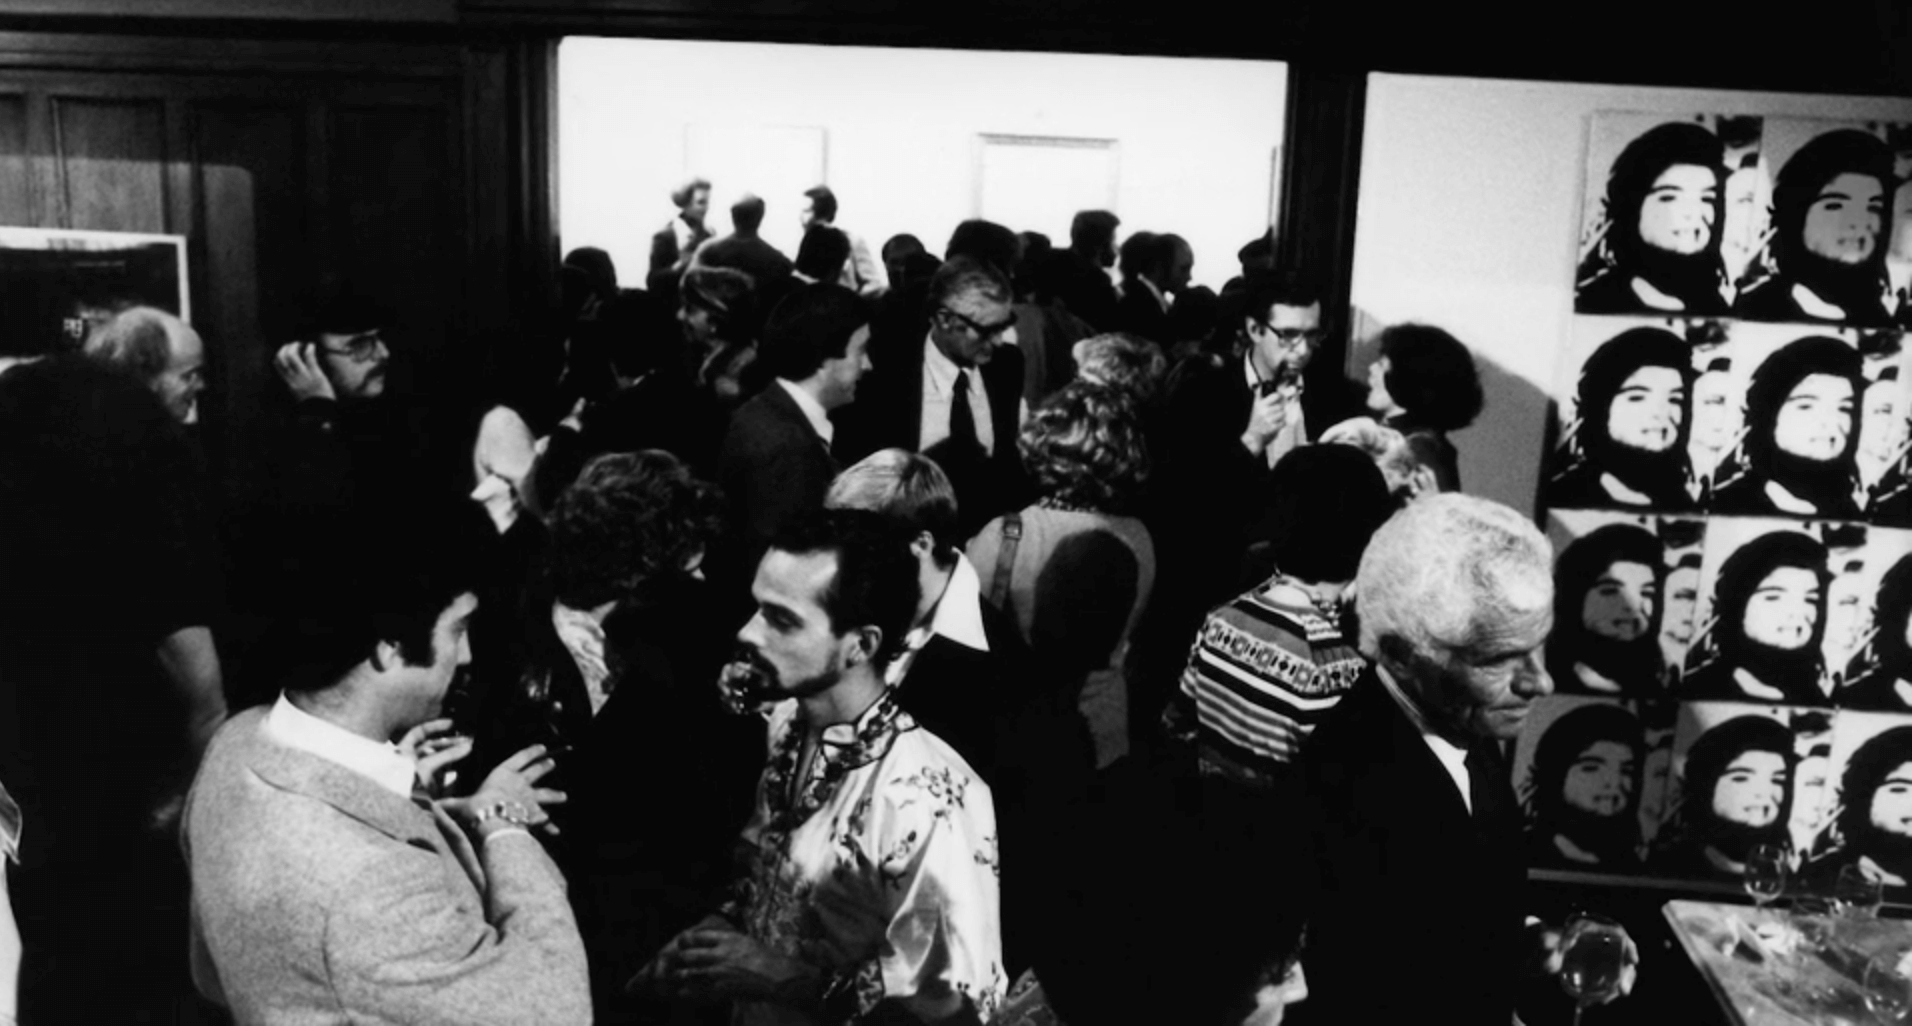 Black and white photo of a party for Andy Waqrhol at the Mount Curve mansion of Gordon Locksley and George Shea